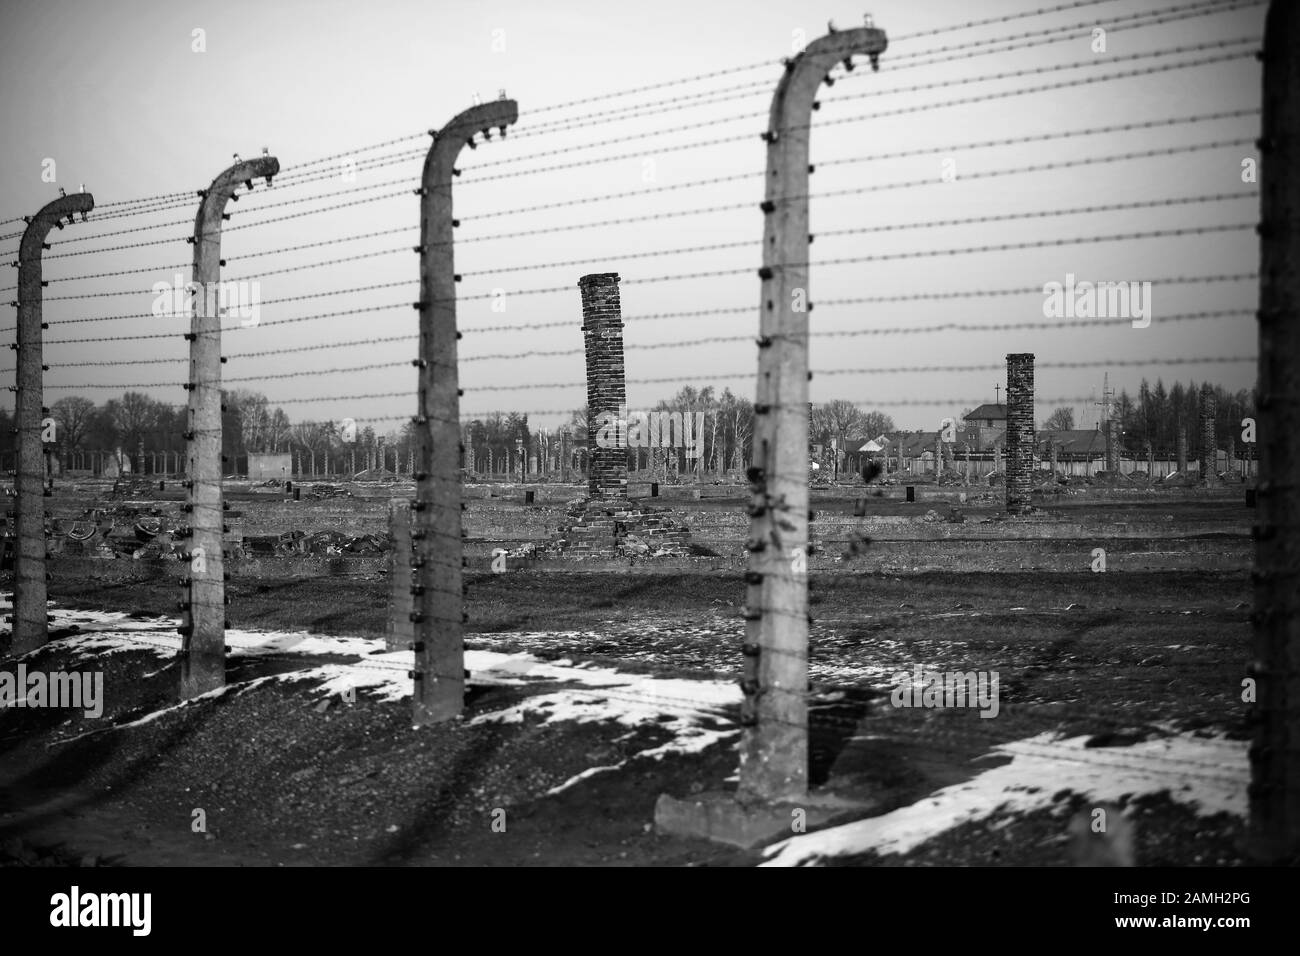 Auschwitz- Birkenau, Poland - electric fence with barbed wire, destroyed barracks, gas chambers and brick crematorium chimneys in concentration camp Stock Photo